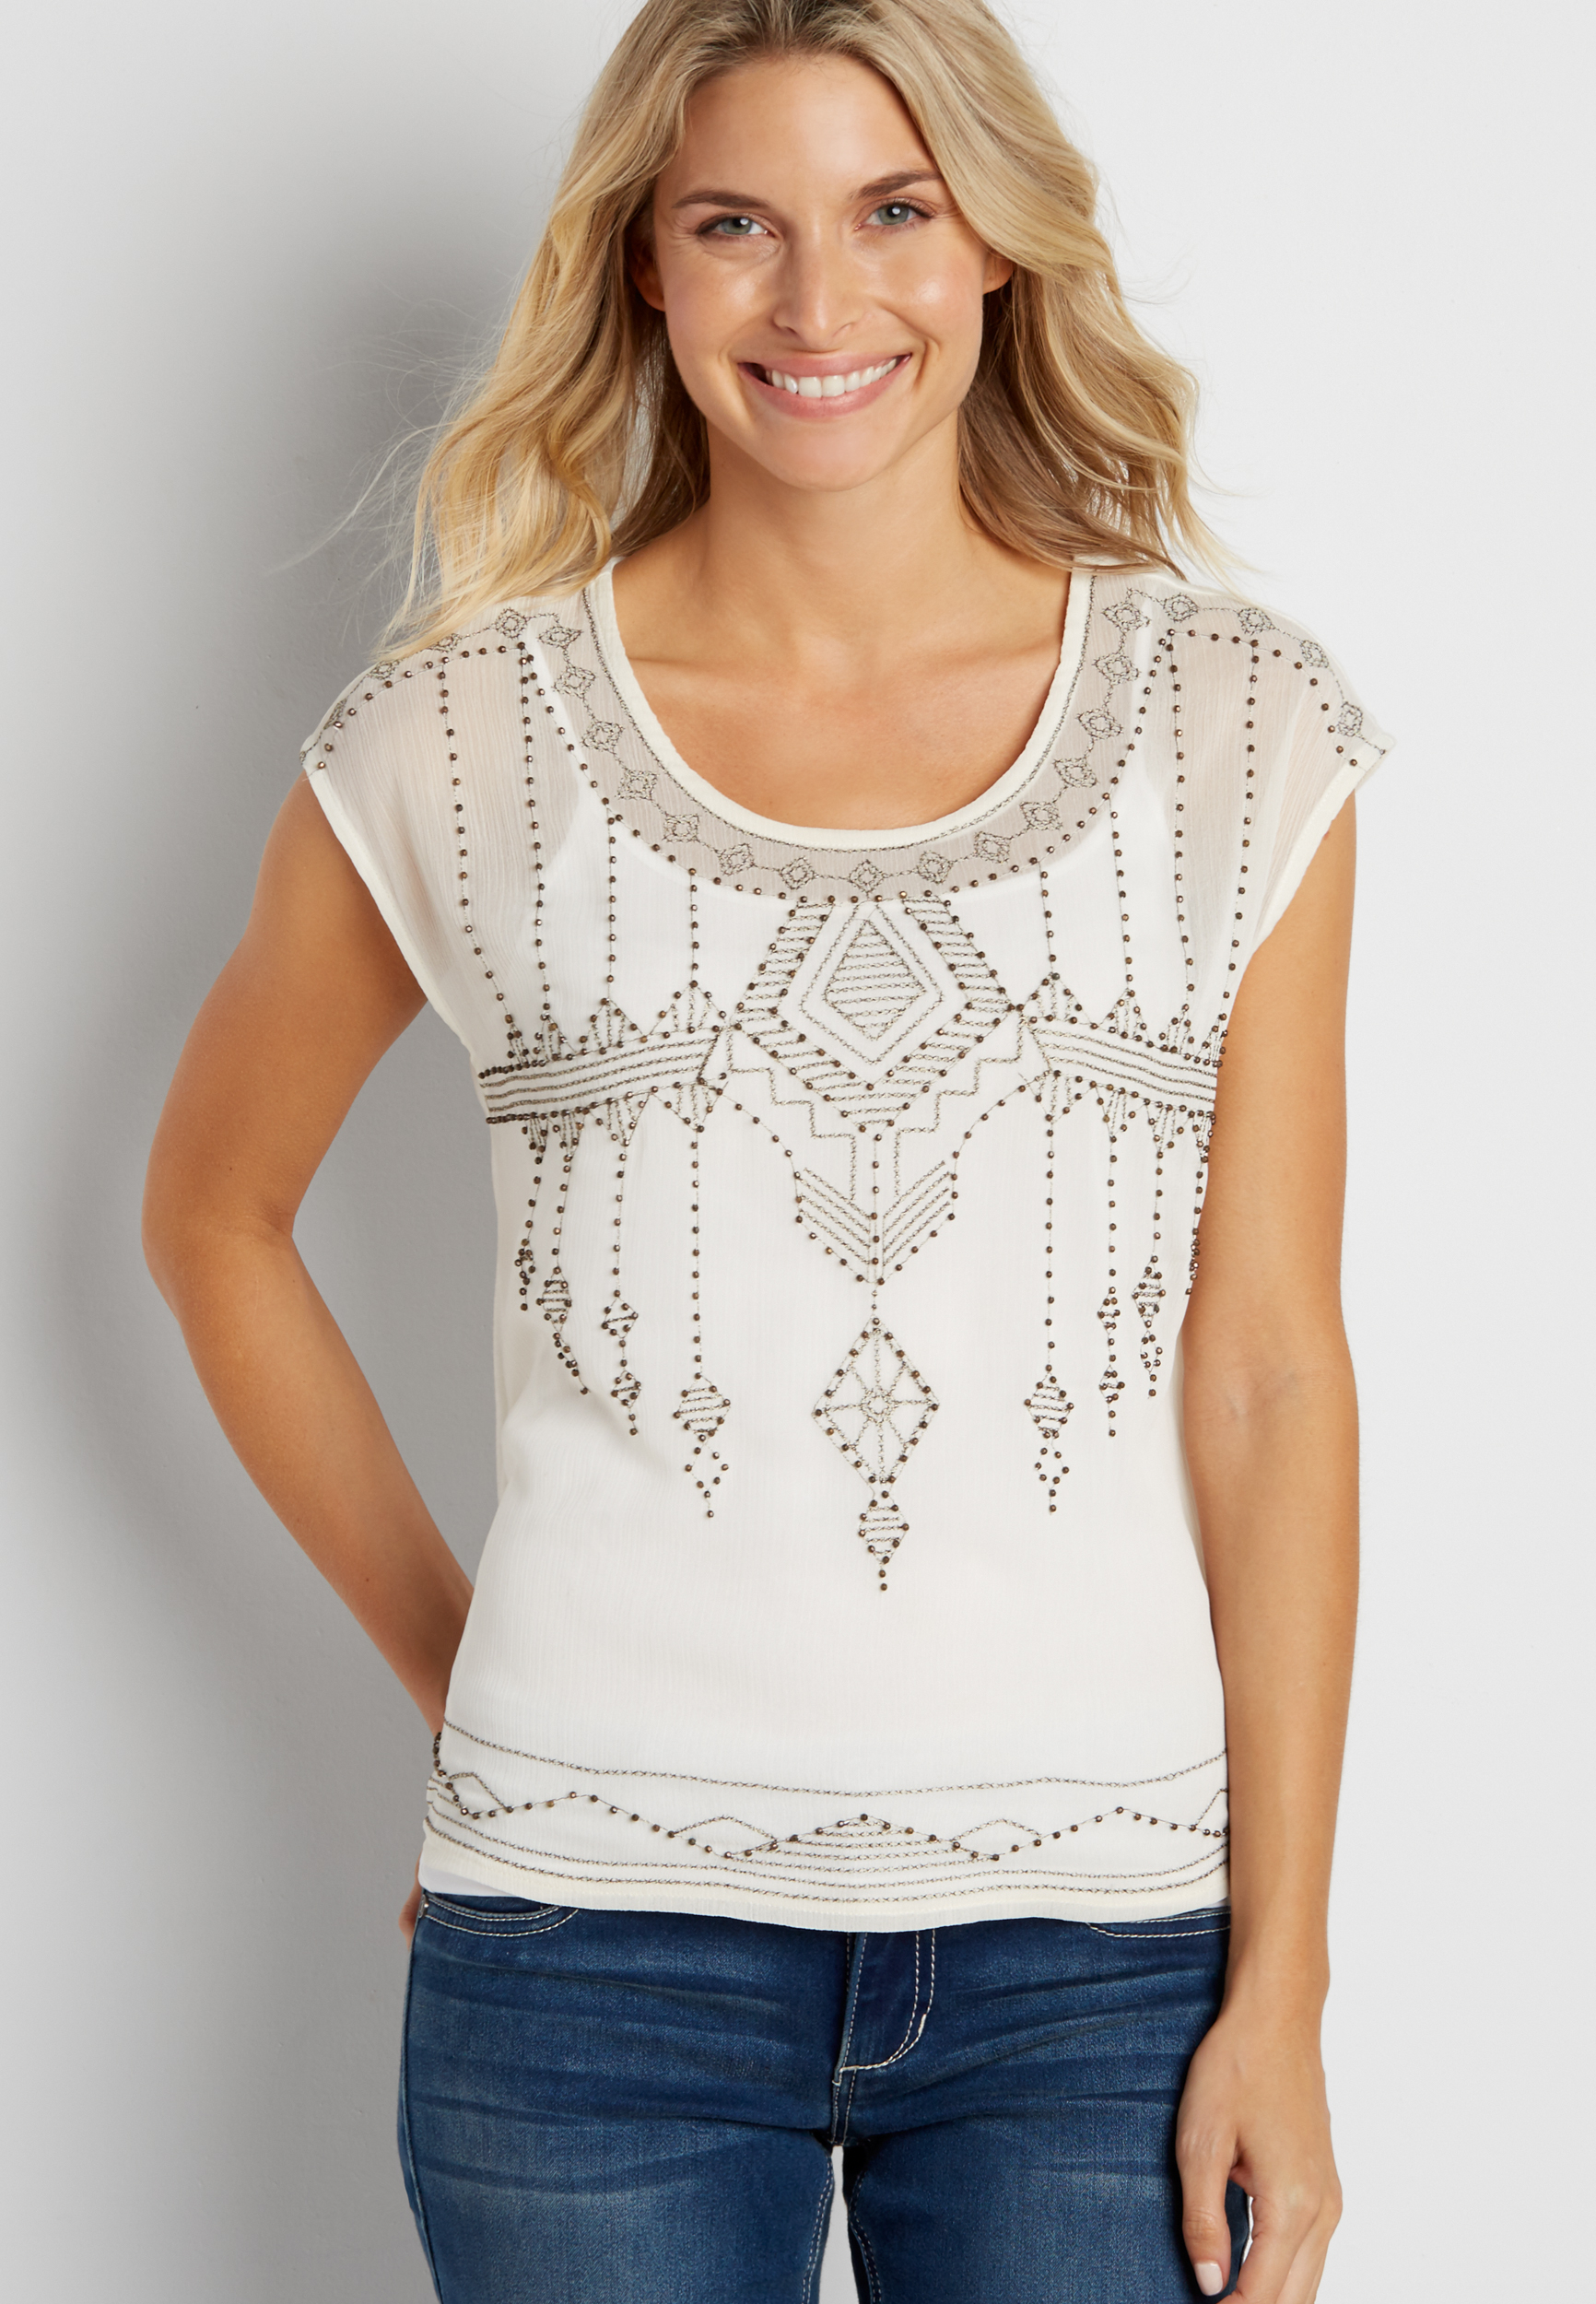 cap sleeve tee with embroidery and beading | maurices